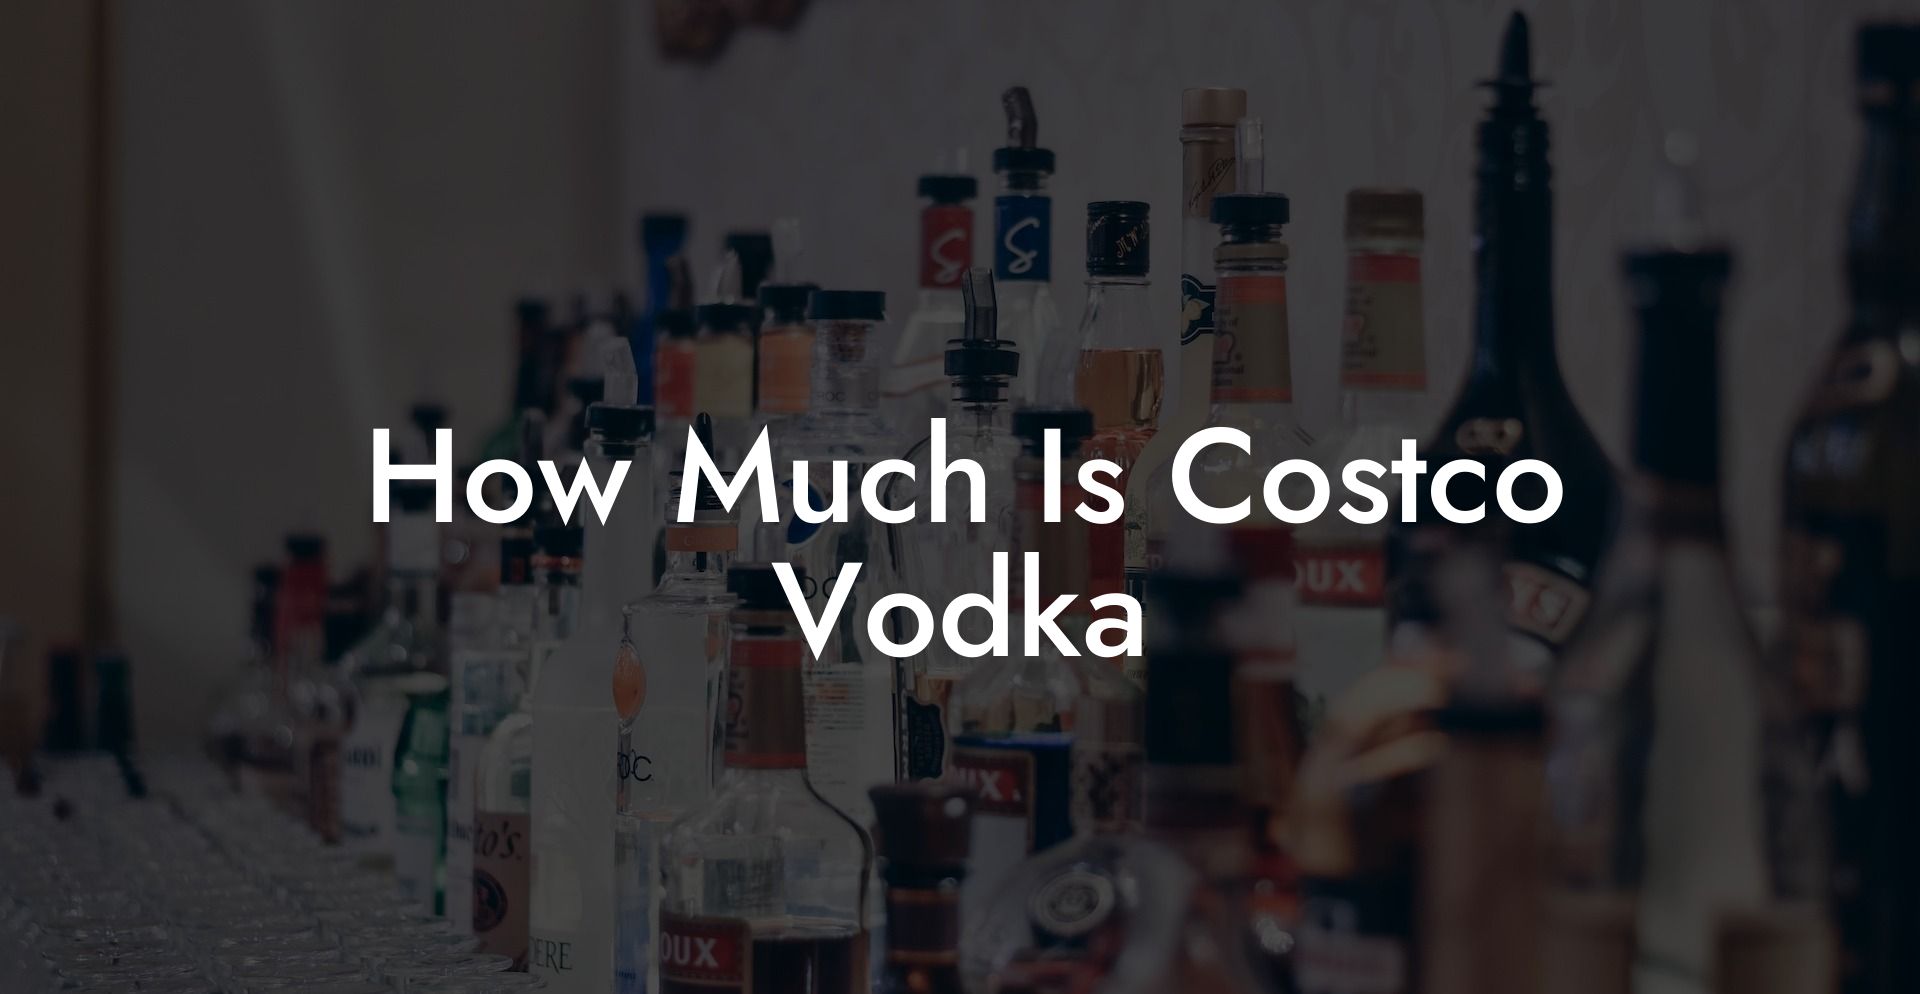 How Much Is Costco Vodka